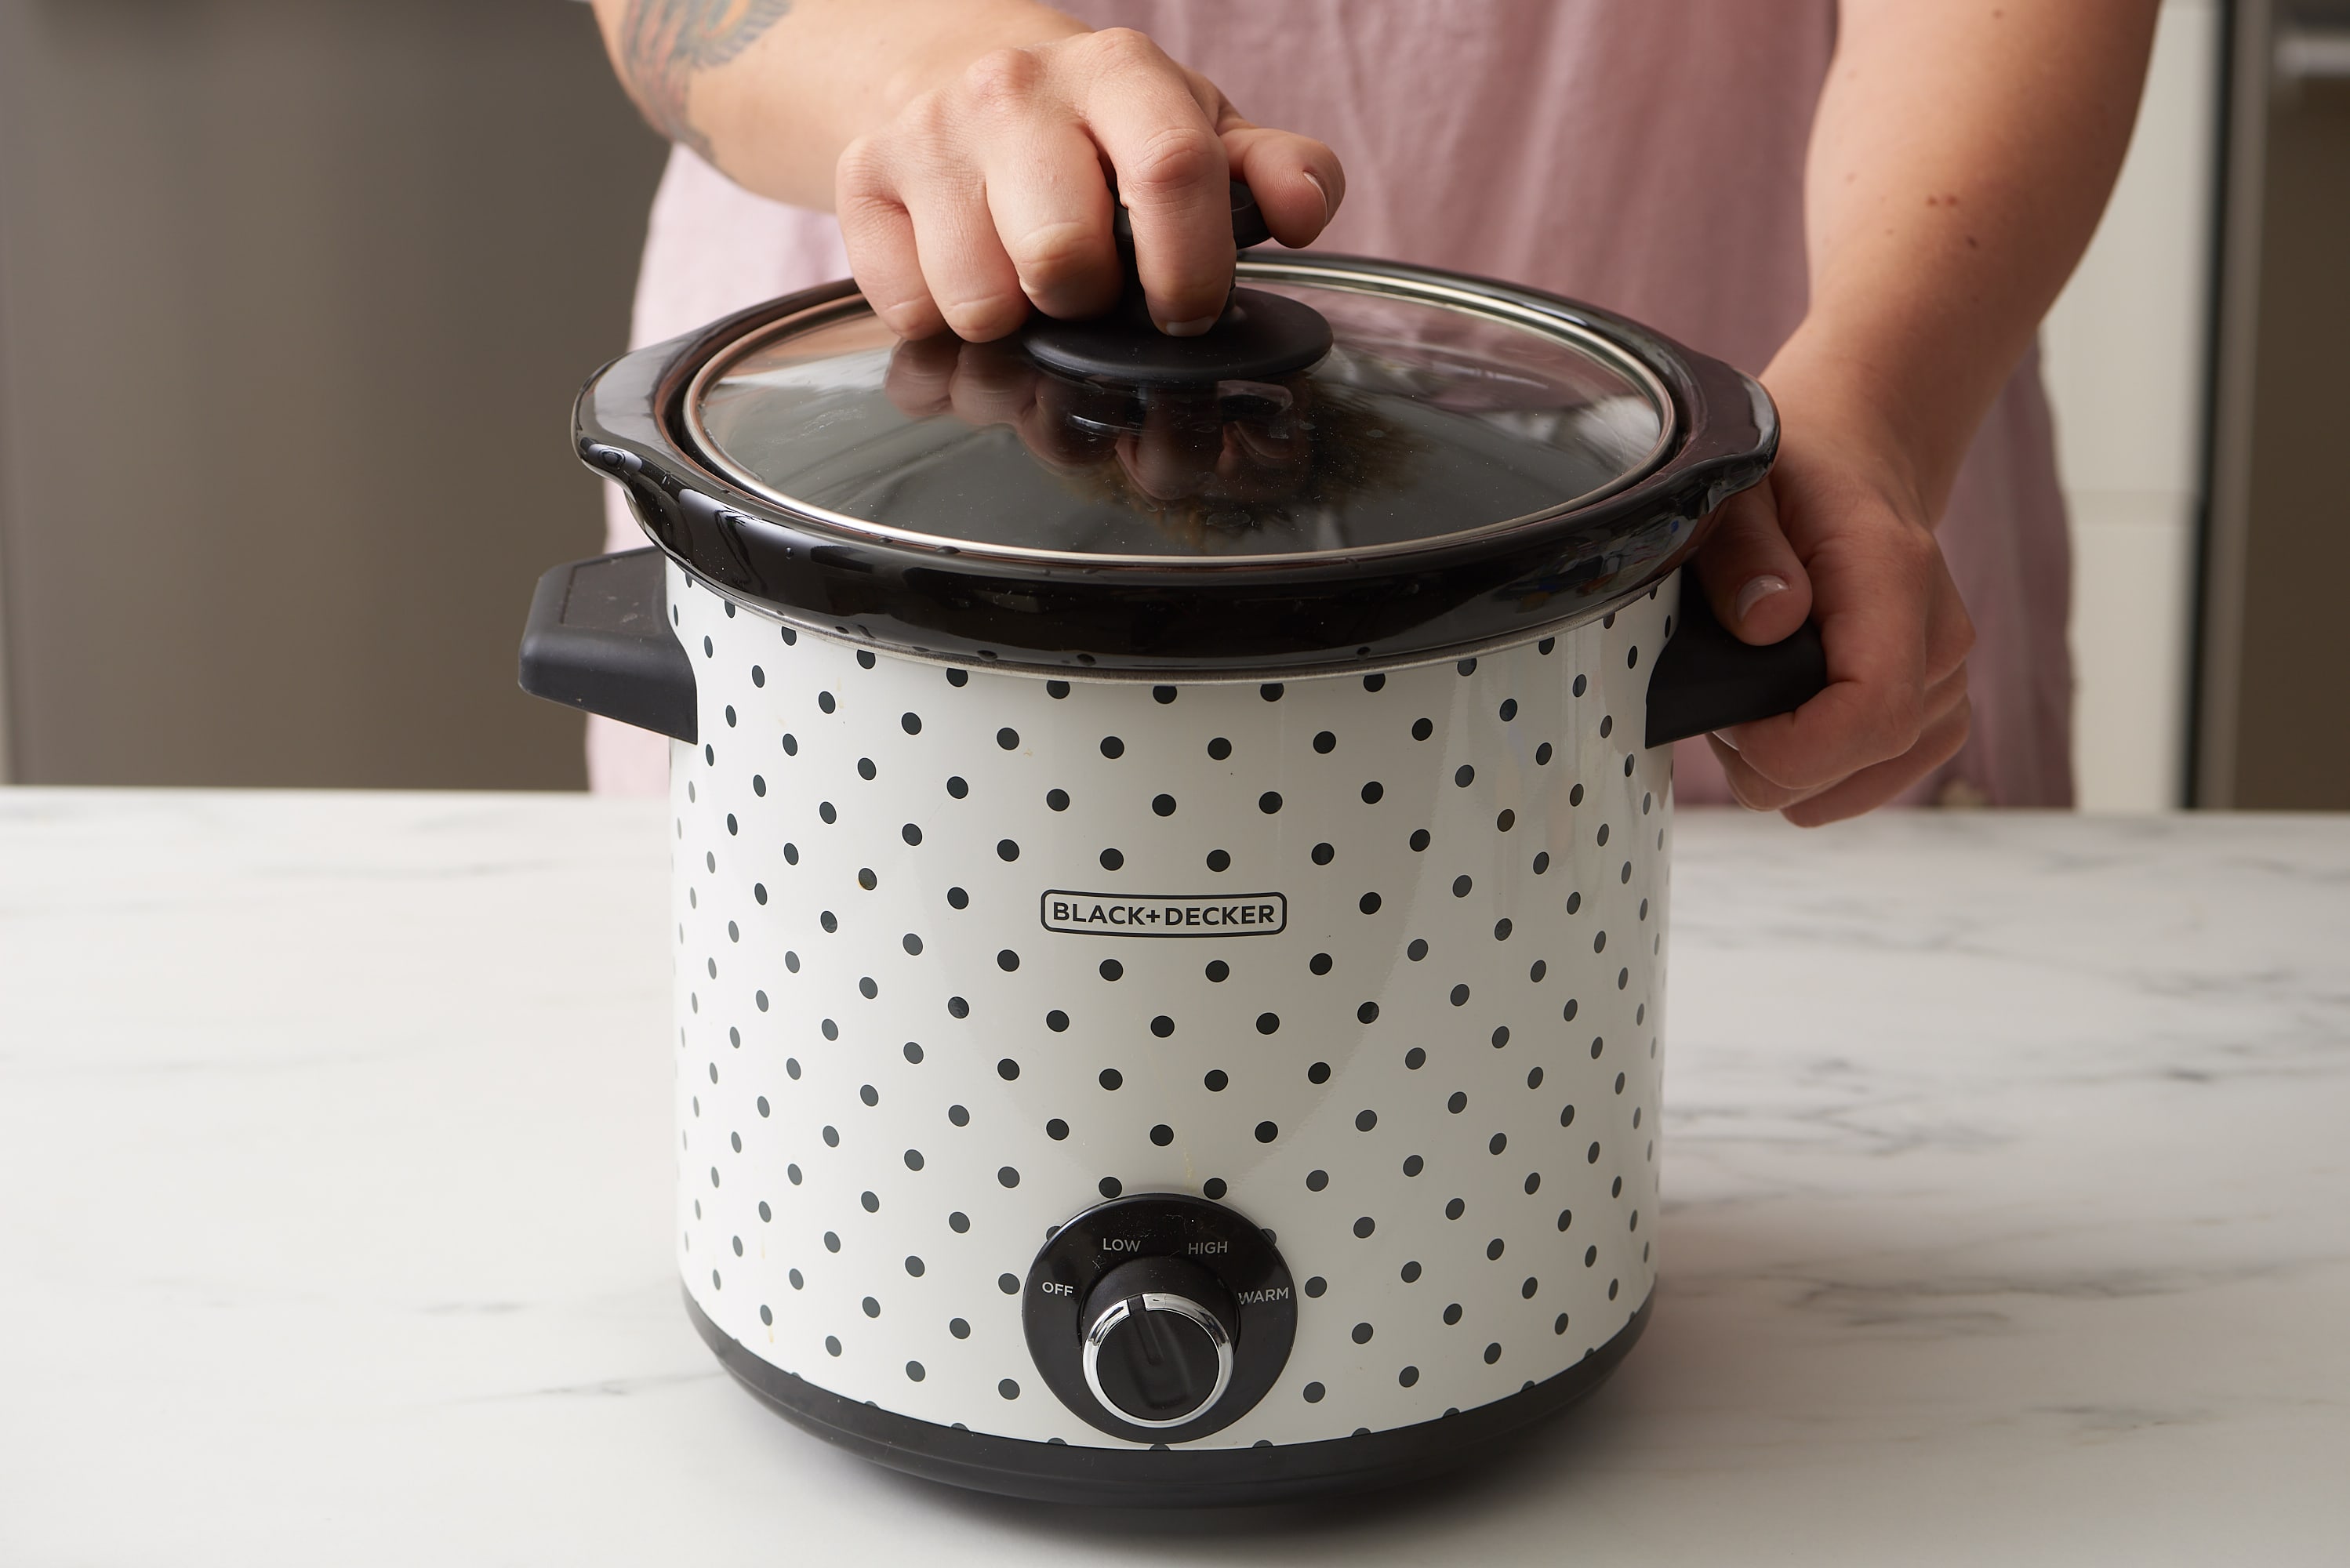 How To Make Oatmeal in the Slow Cooker The Simplest, Easiest Method